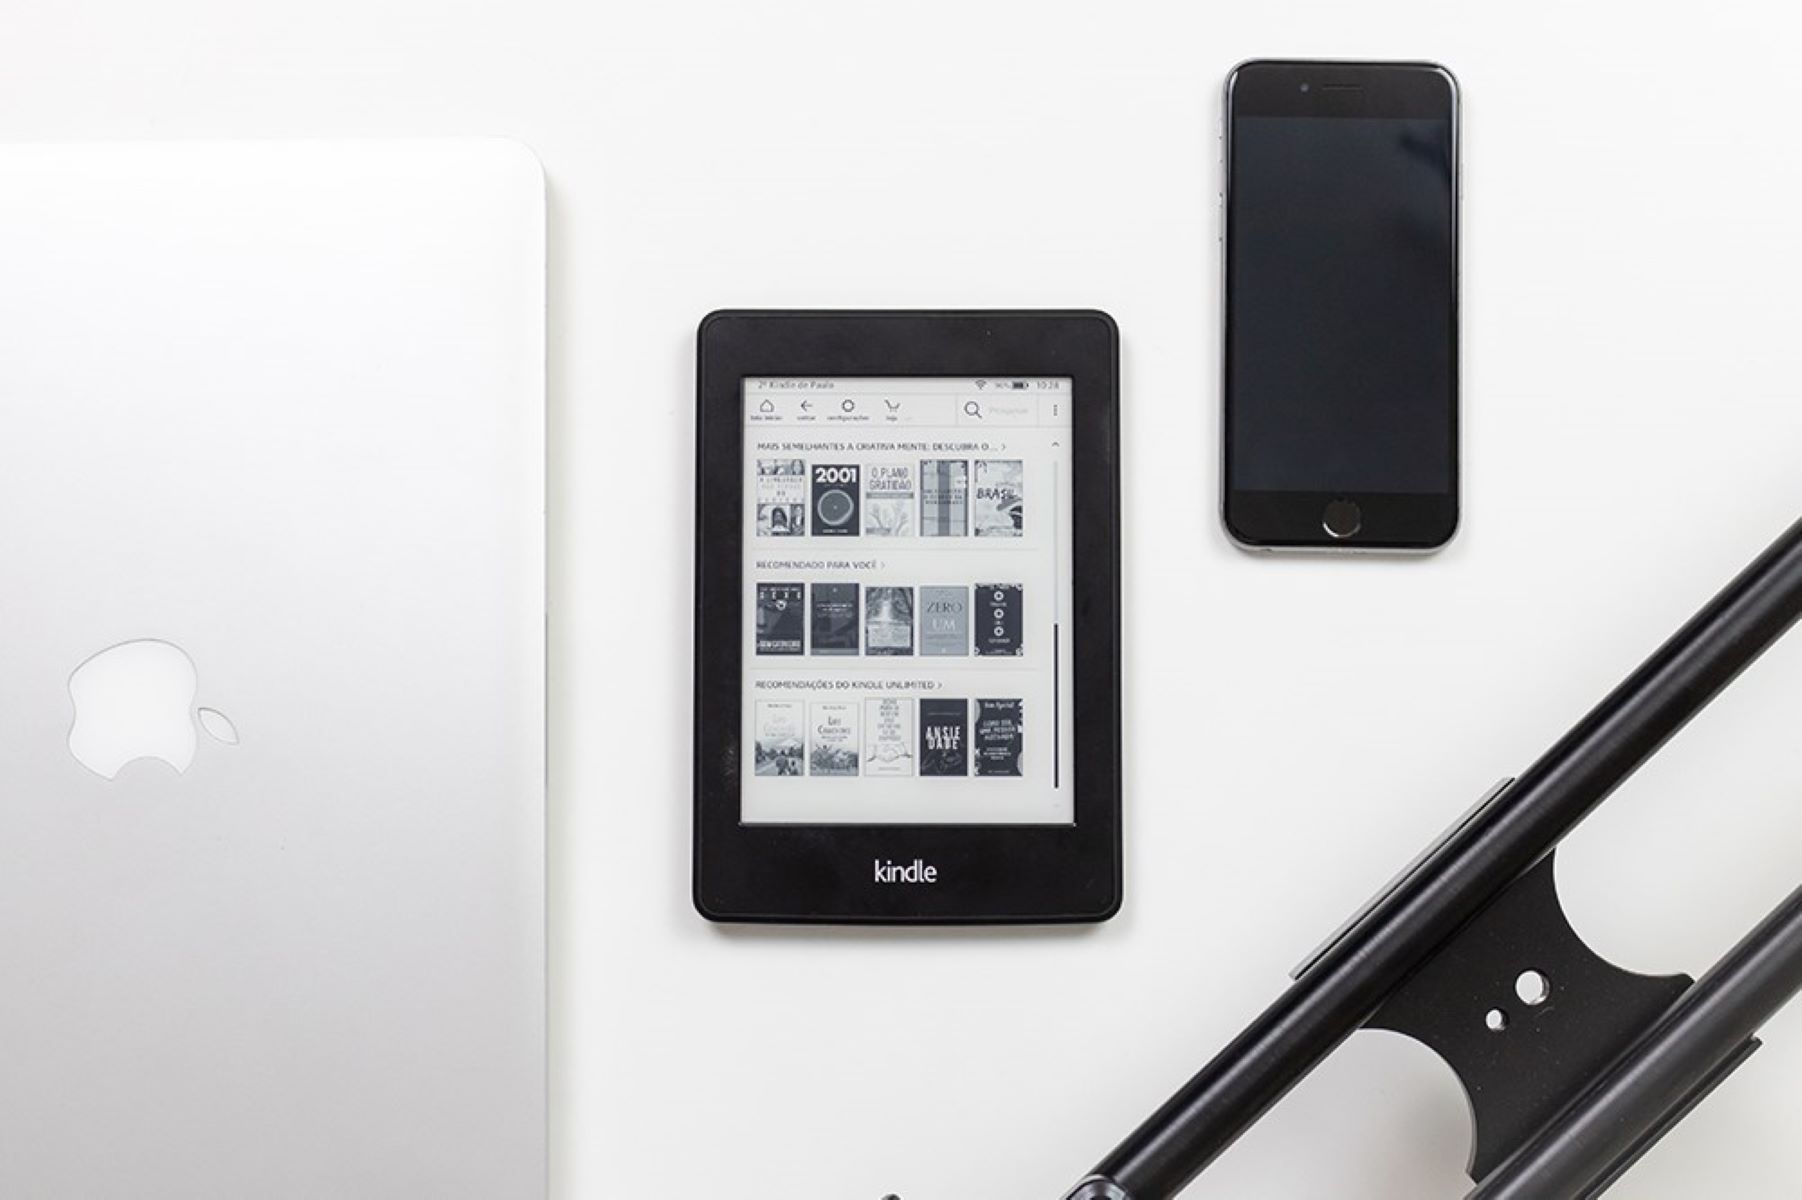 How To Transfer Books To Kindle Fire